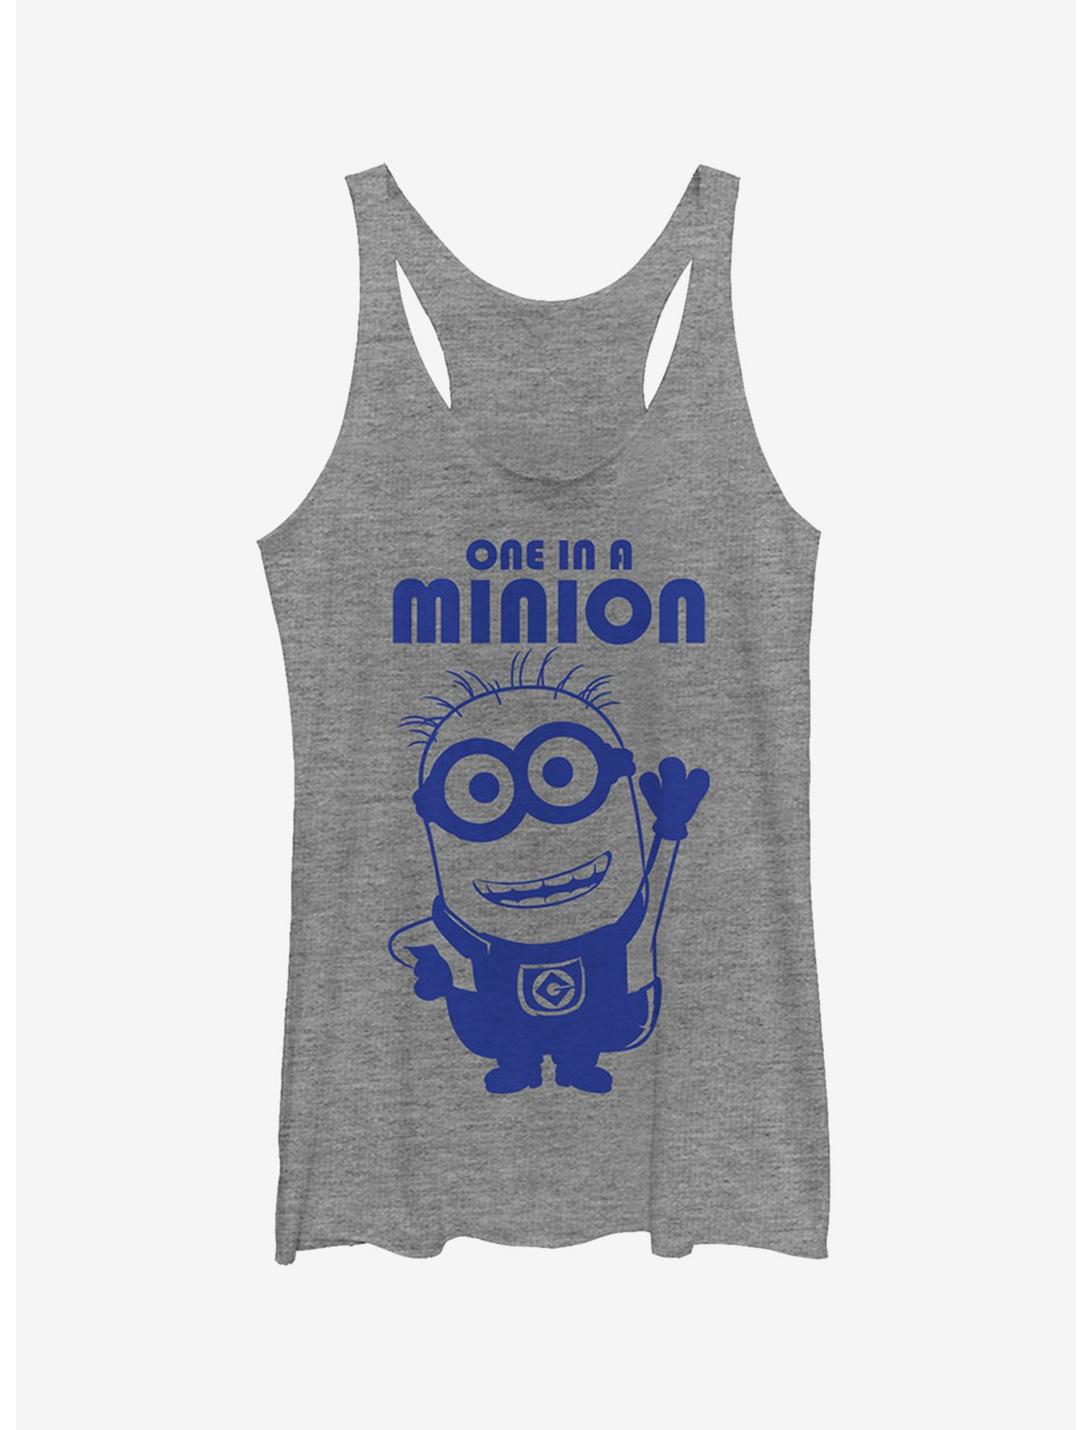 Minion One in Minion Wave Girls Tank Top, GRAY HTR, hi-res